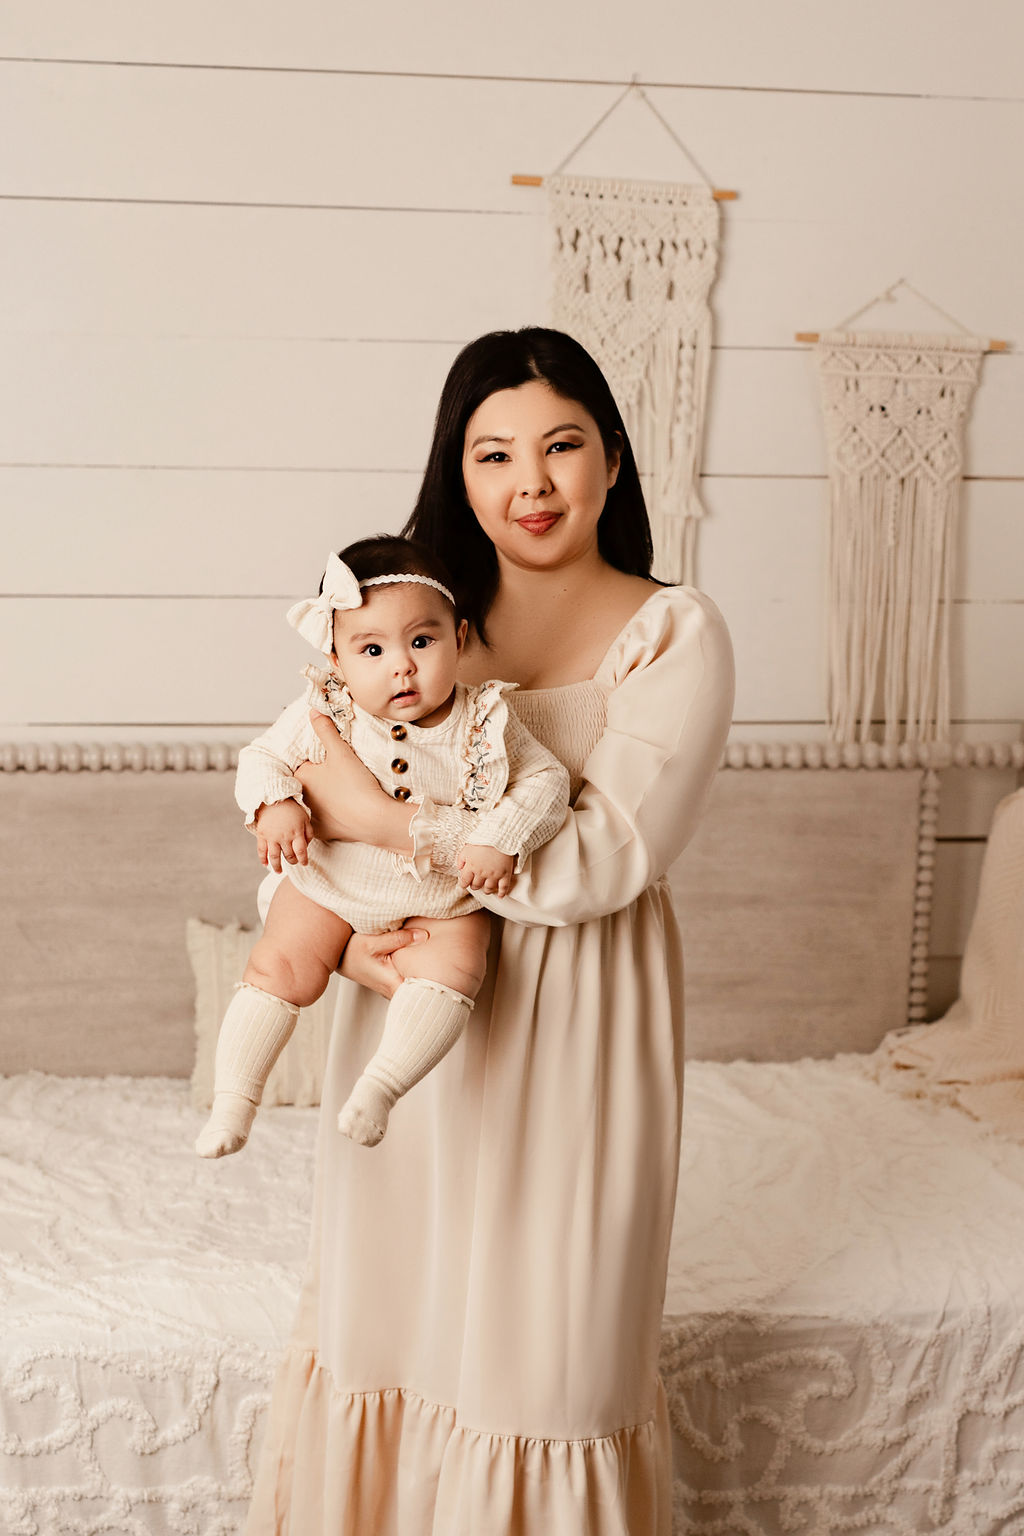 A happy mother in matching cream dresses stands in a studio bedroom holding her toddler daughter